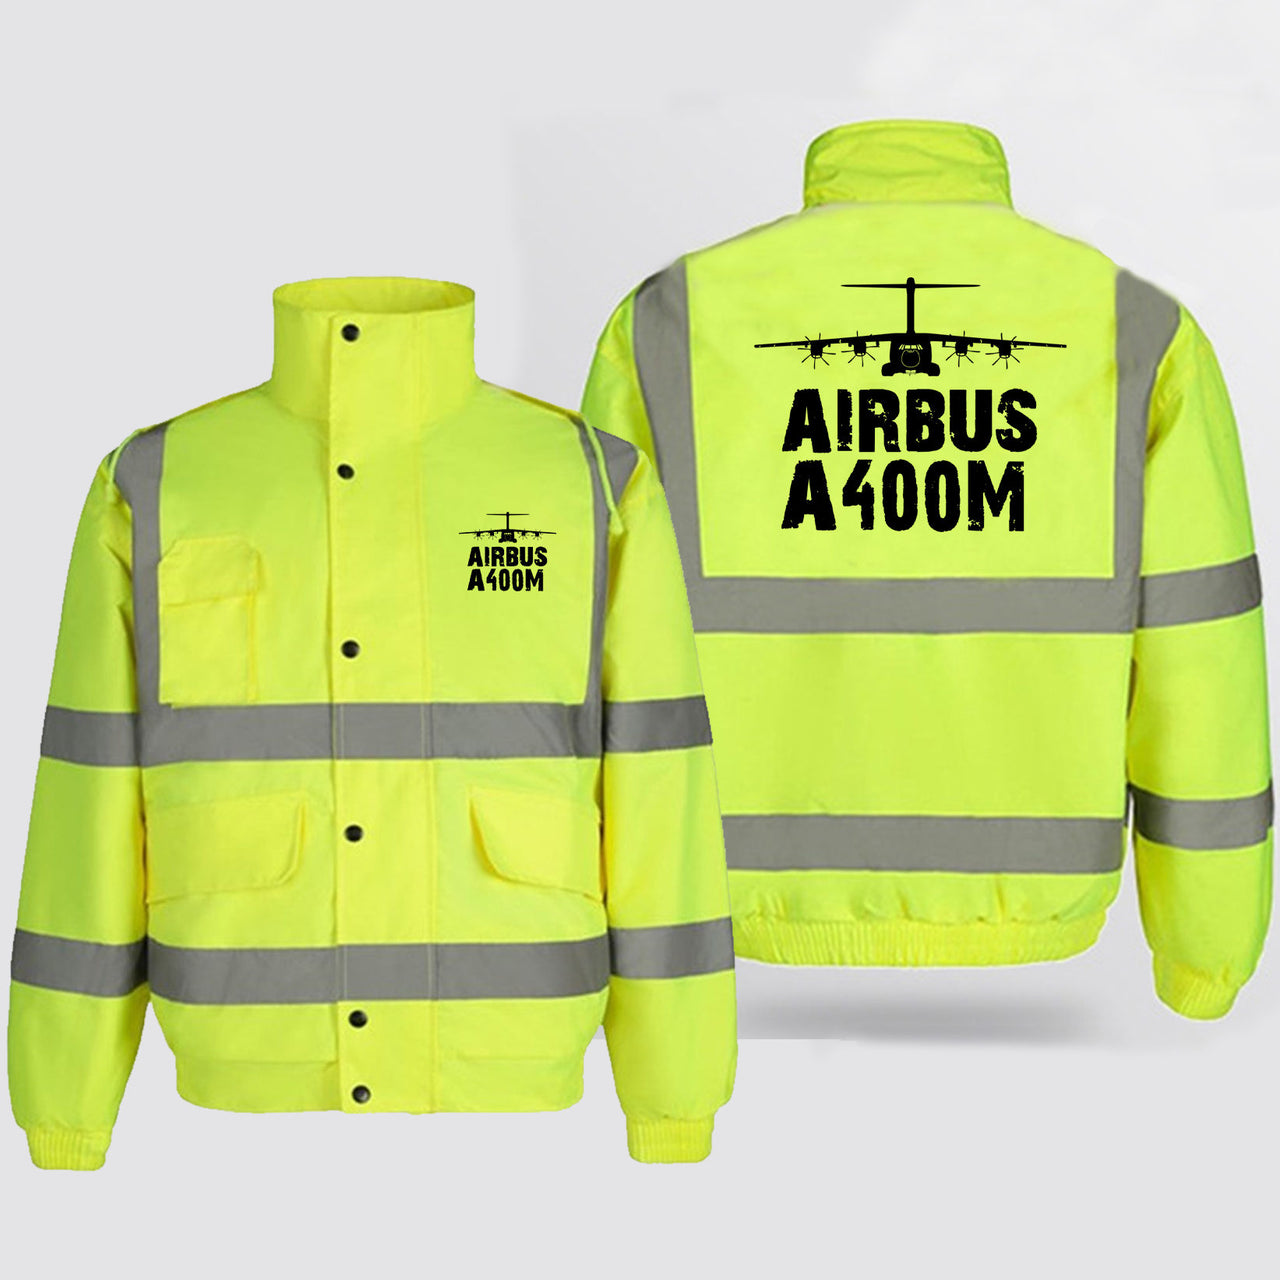 Airbus A400M & Plane Designed Reflective Winter Jackets